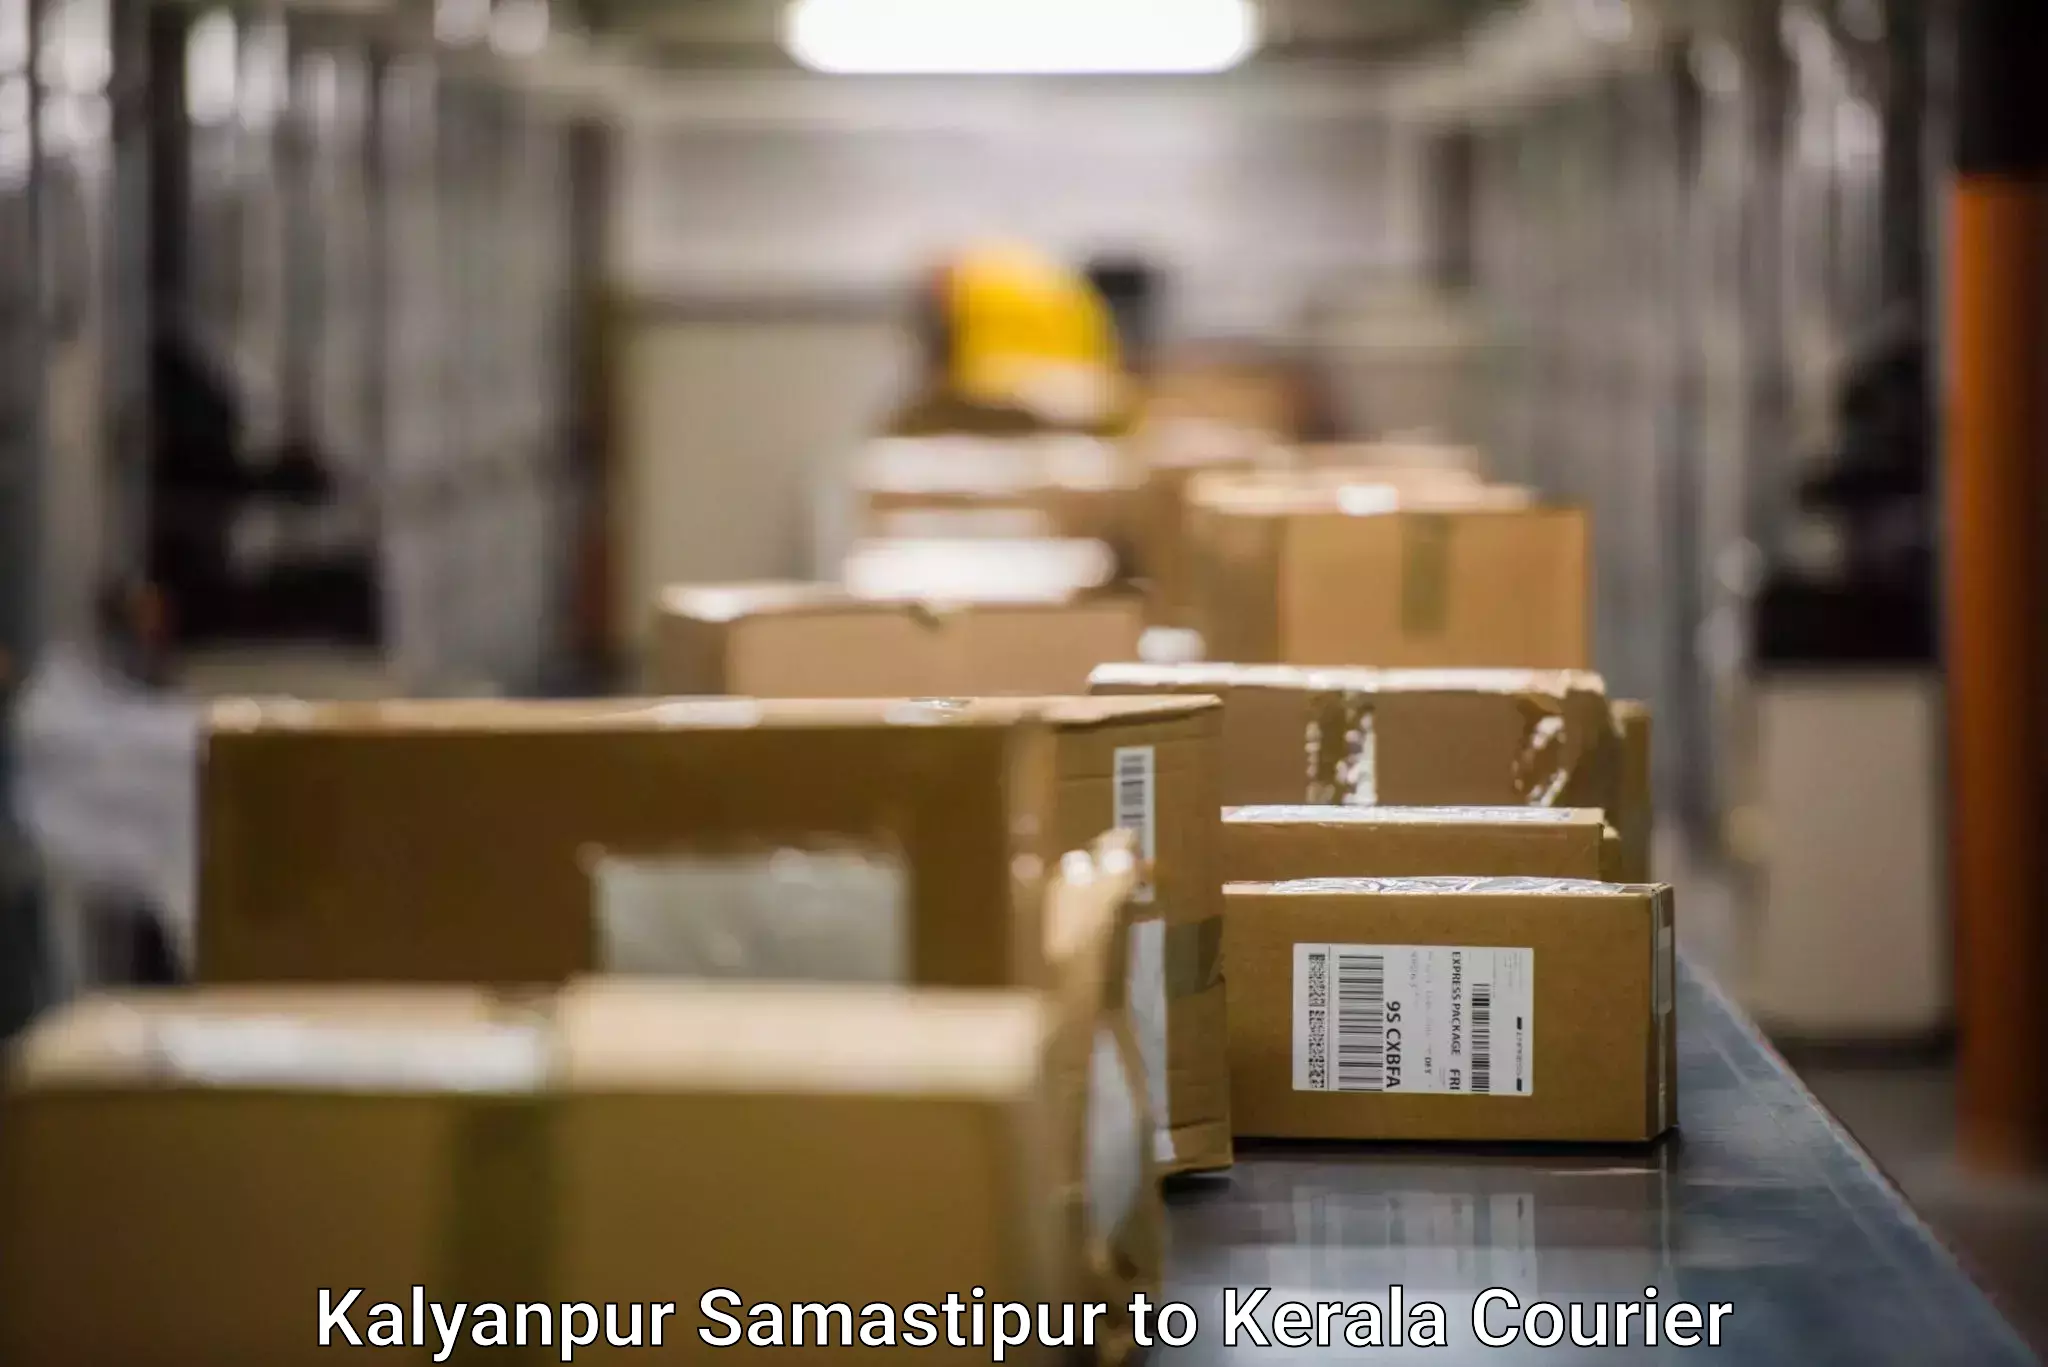 Automated parcel services Kalyanpur Samastipur to Adimali